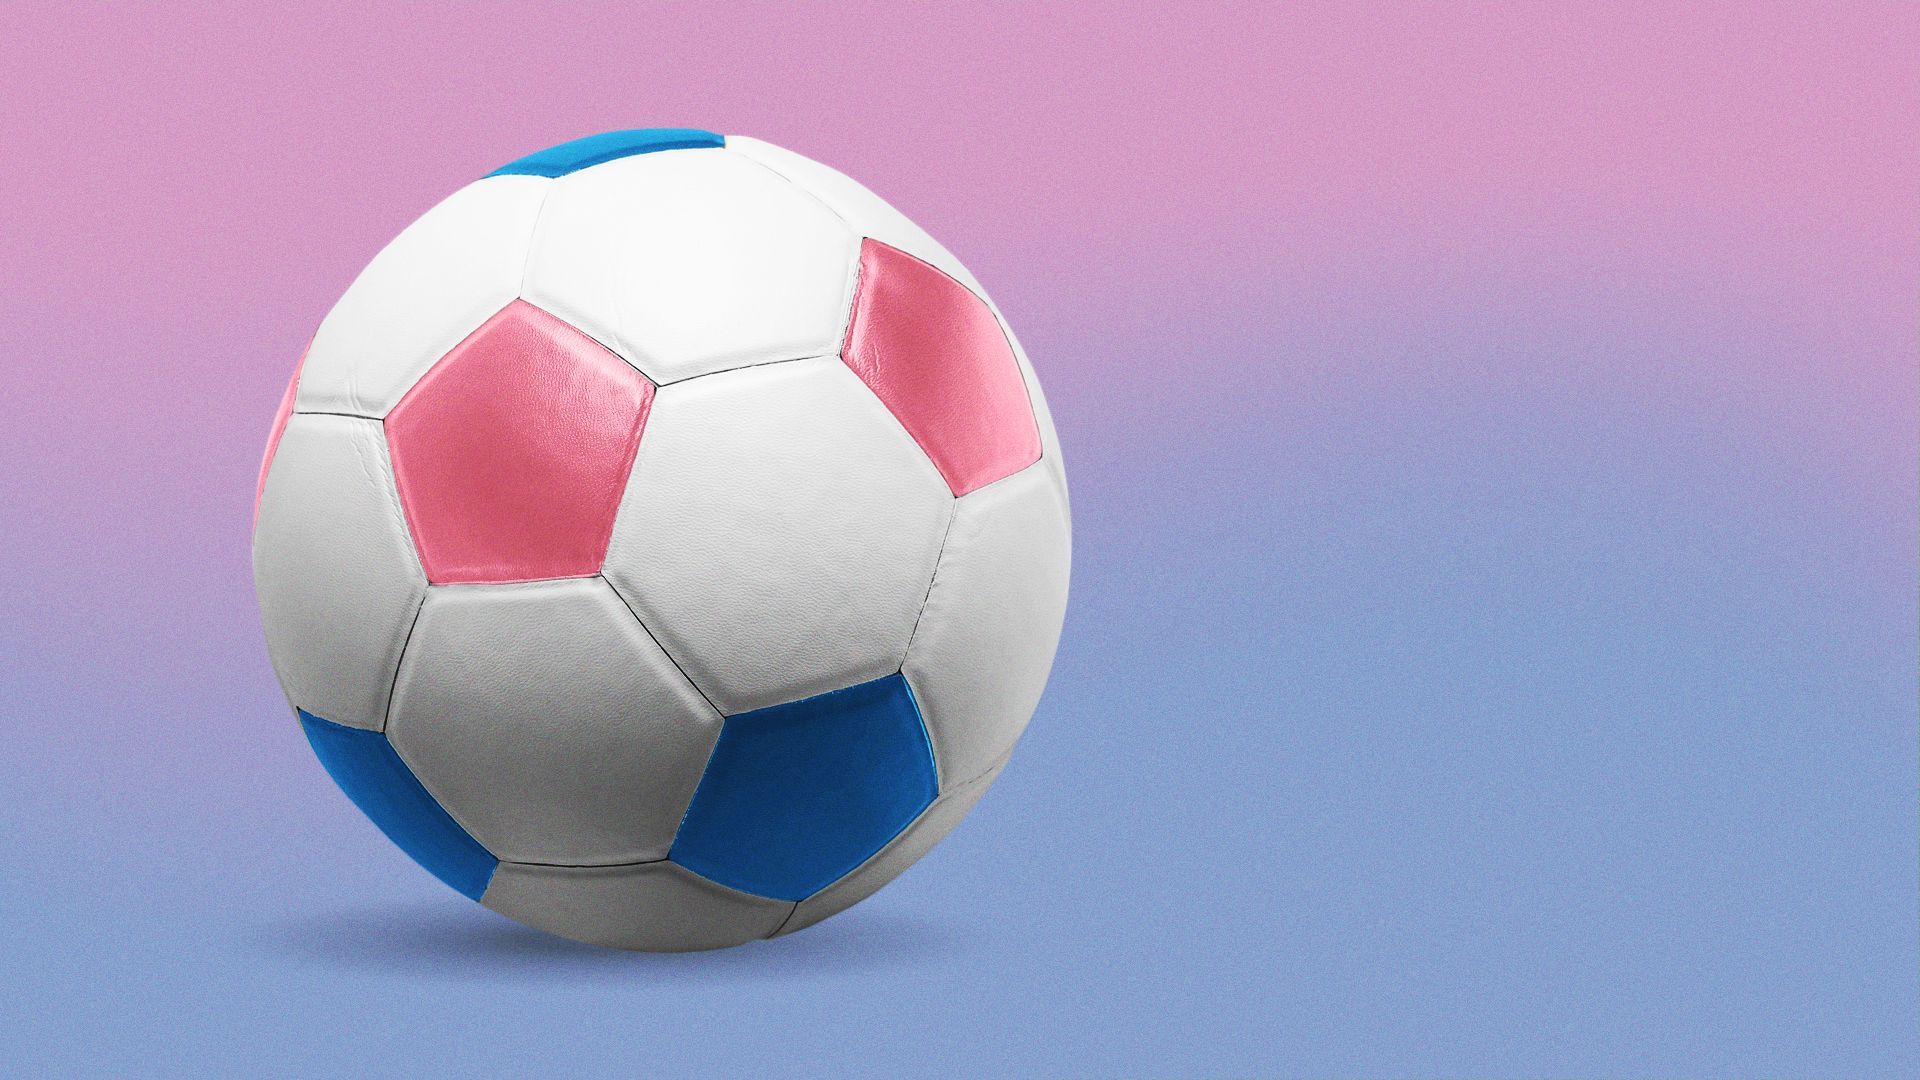 Illustration of a soccer ball with the patches colored in light pink and blue, similar to the transgender flag.